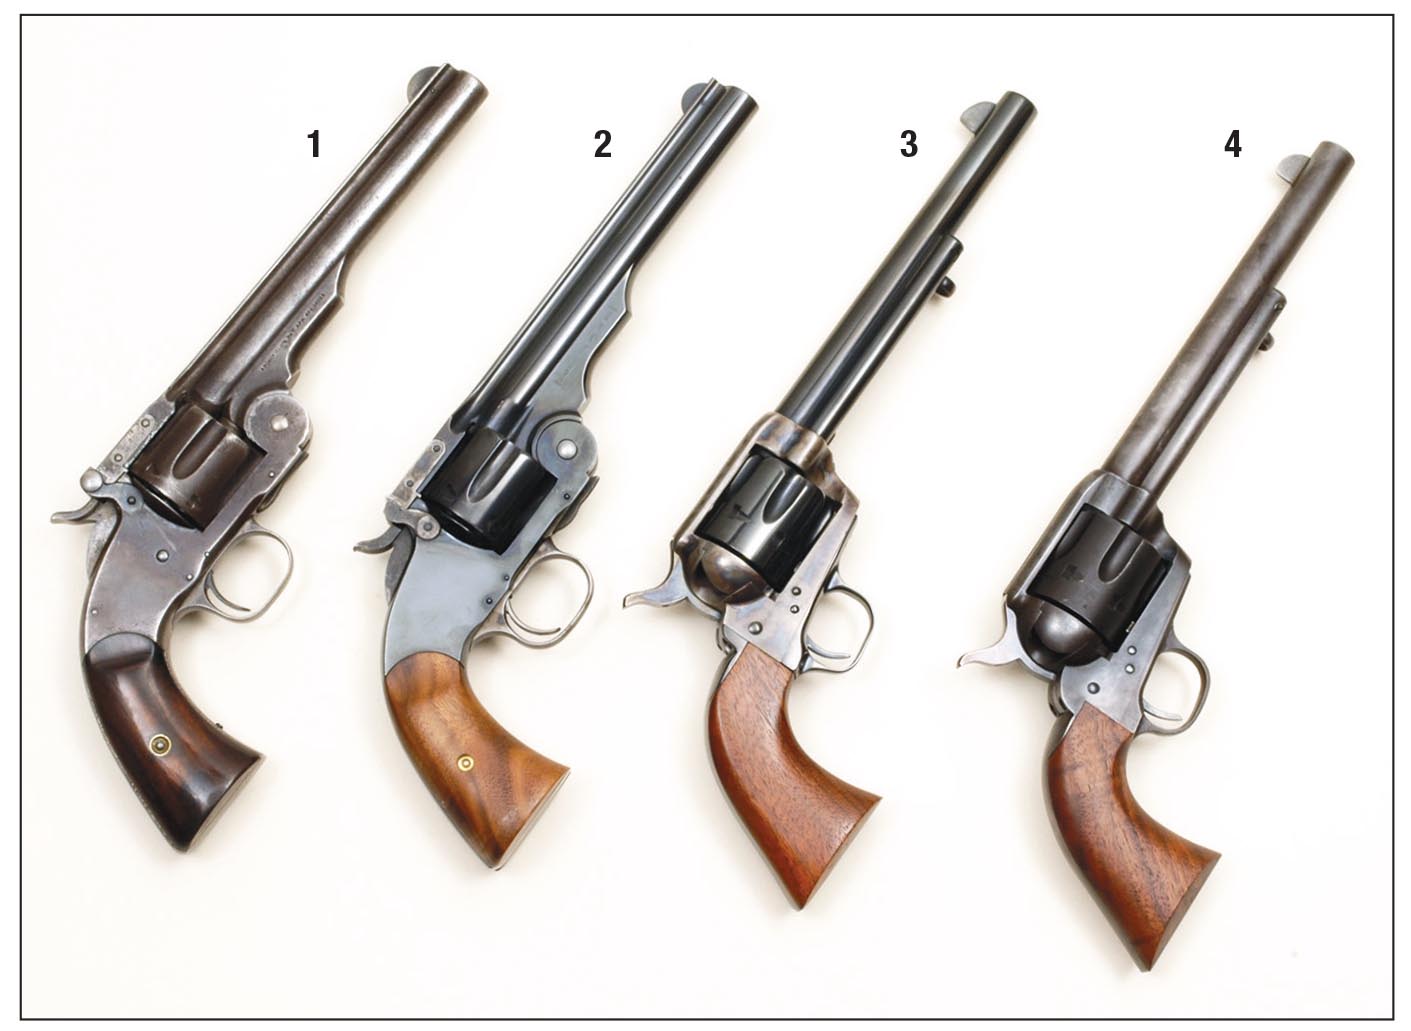 Mike has handloaded .45s for all these revolvers: (1) an original S&W Model No. 3 (Schofield), (2) new S&W Model No. 3 (Schofield), (3) Colt SAA 1873/1973 Commemorative and a (4) U.S. Firearms Custer Battlefield .45.